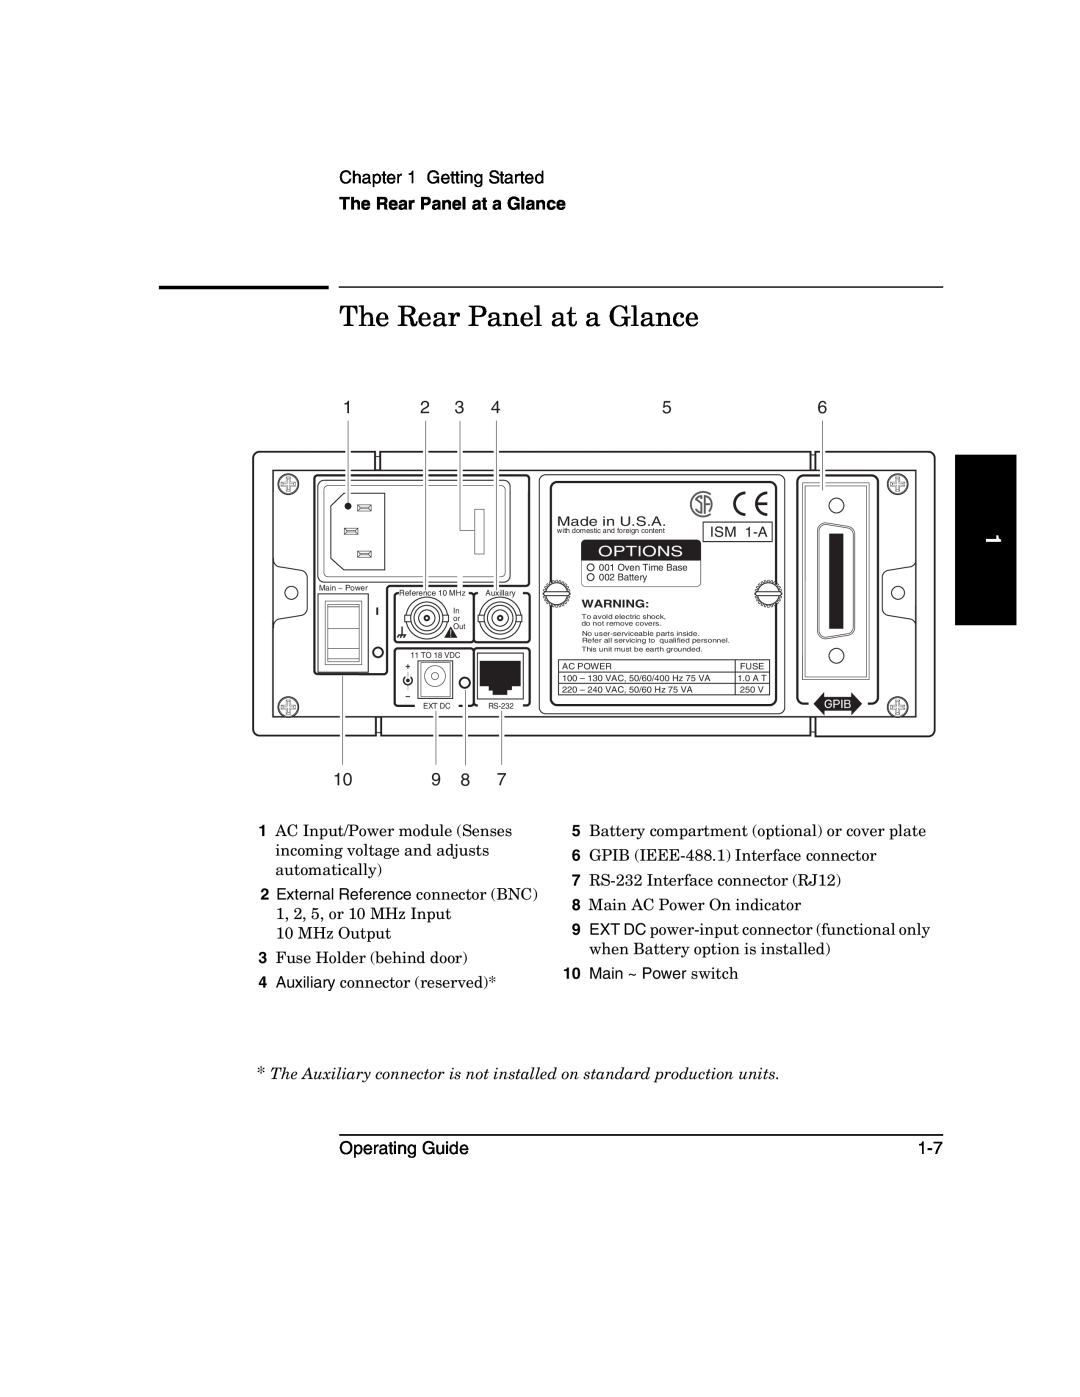 Agilent Technologies 53150A, 53152A, 53151A manual The Rear Panel at a Glance, Getting Started, Operating Guide 